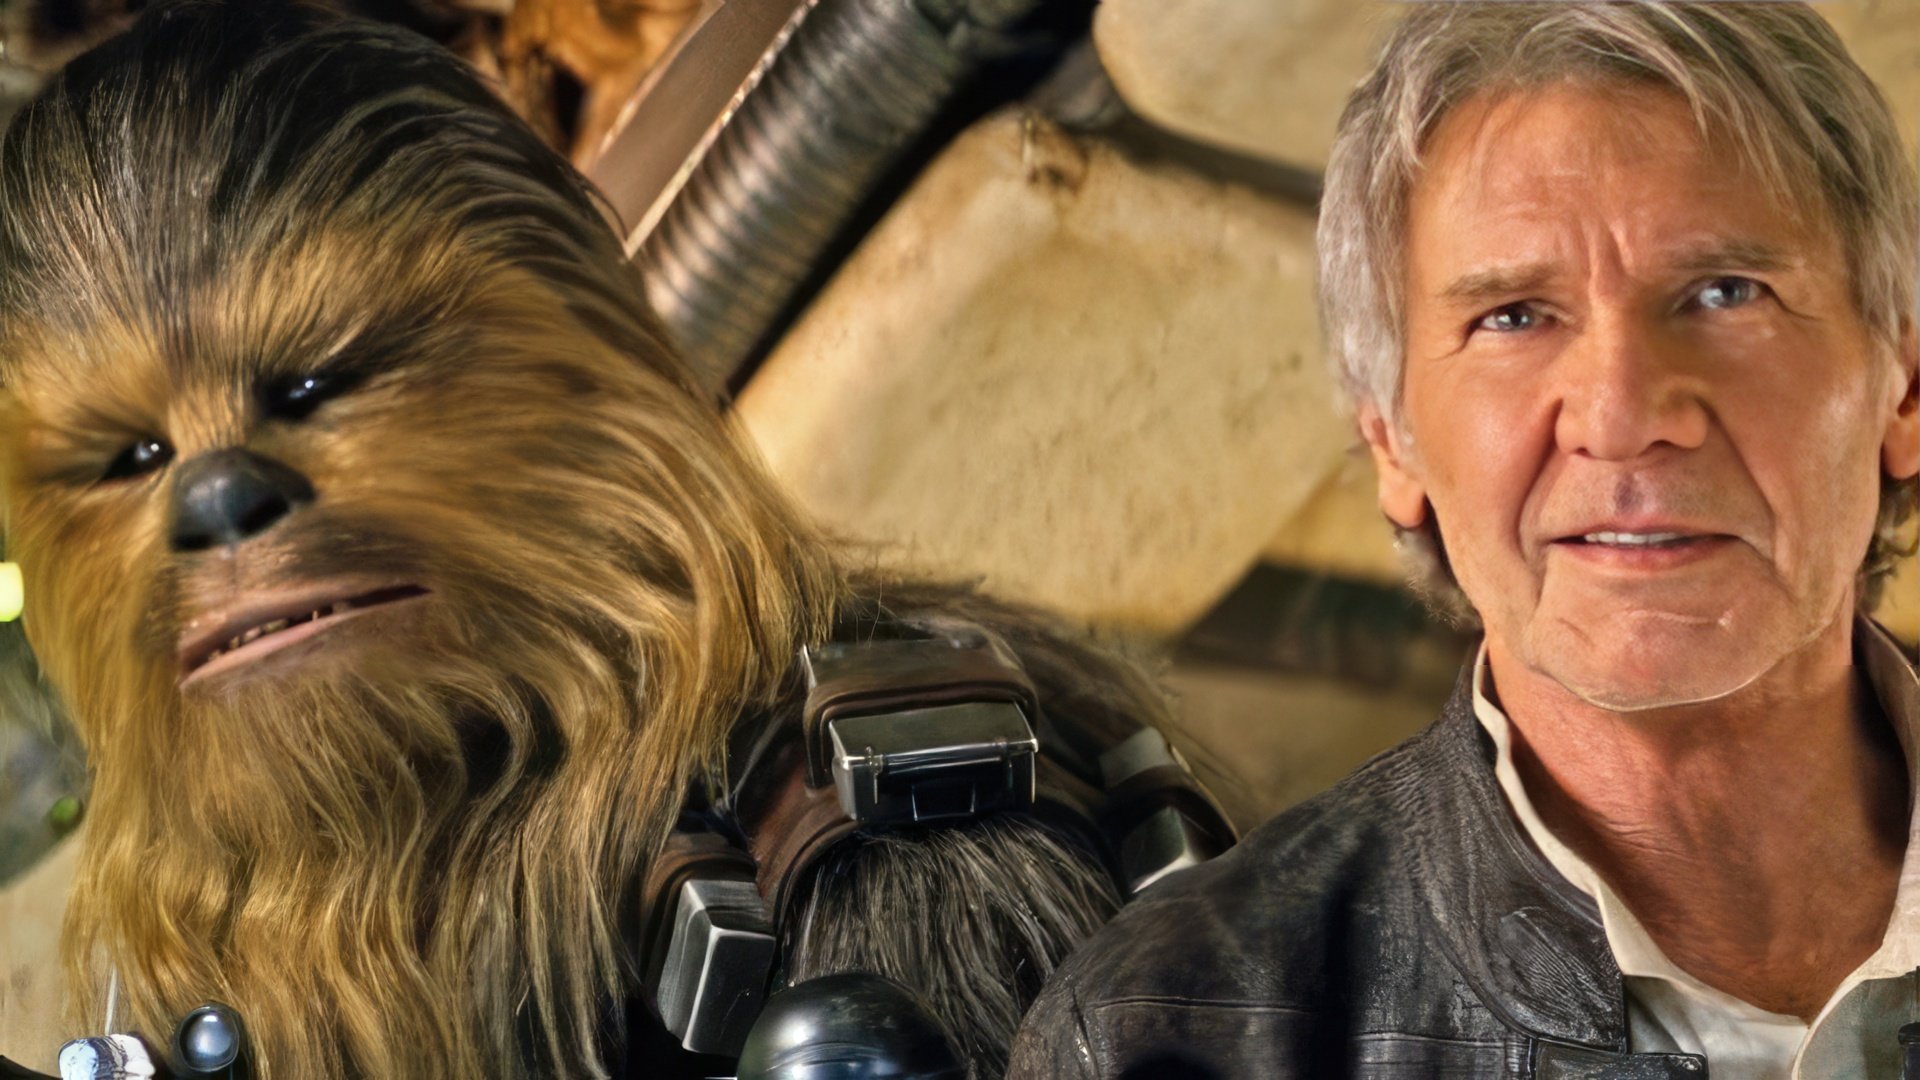 Harrison Ford in the Star Wars: The Force Awakens